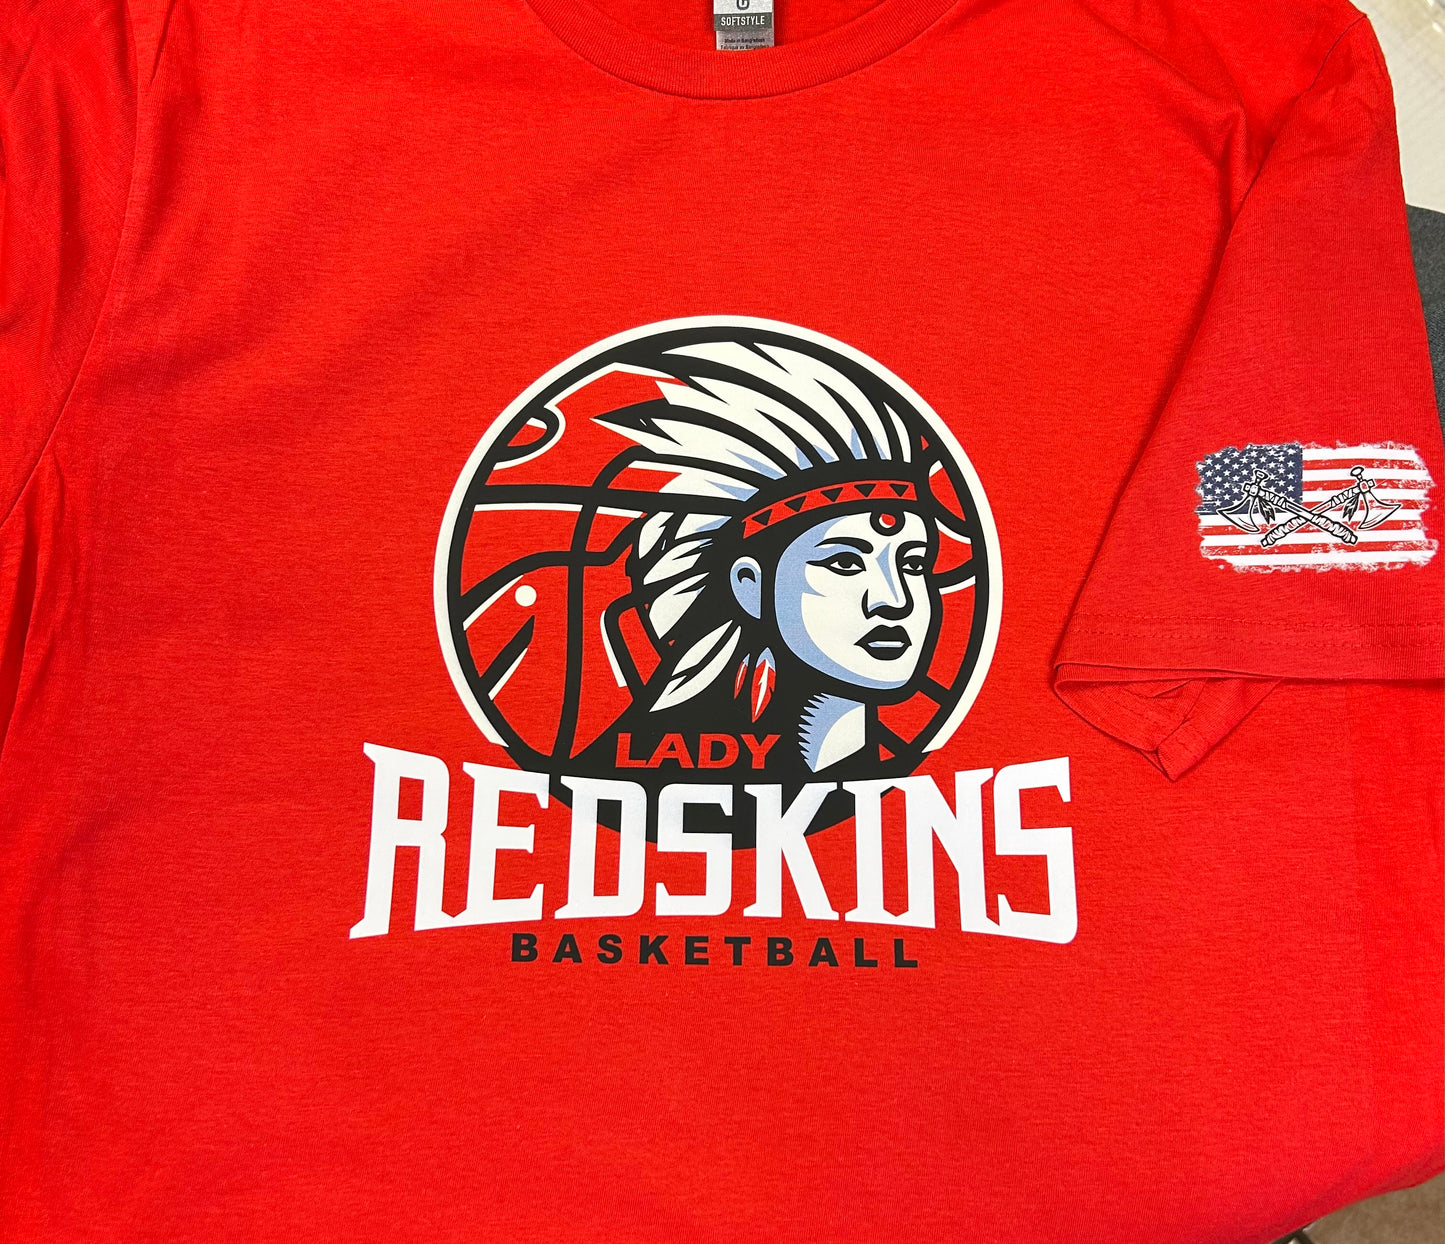 Knox Lady Redskins Basketball T-shirt - Red - Adult and Youth Sizes